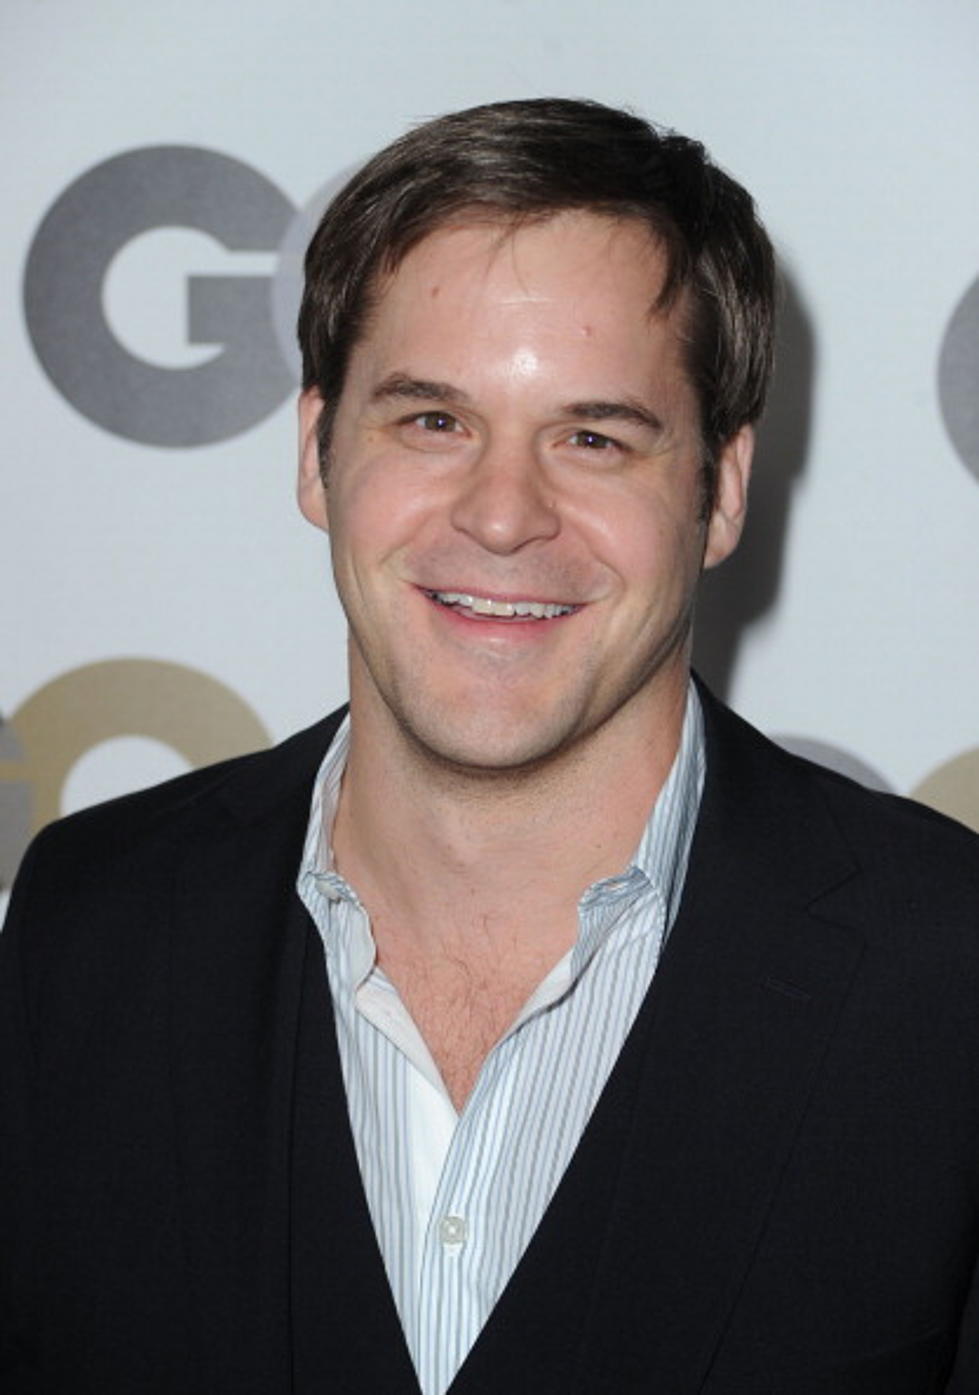 Kyle Bornheimer Of NBC’s “Perfect Couples” [INTERVIEW]